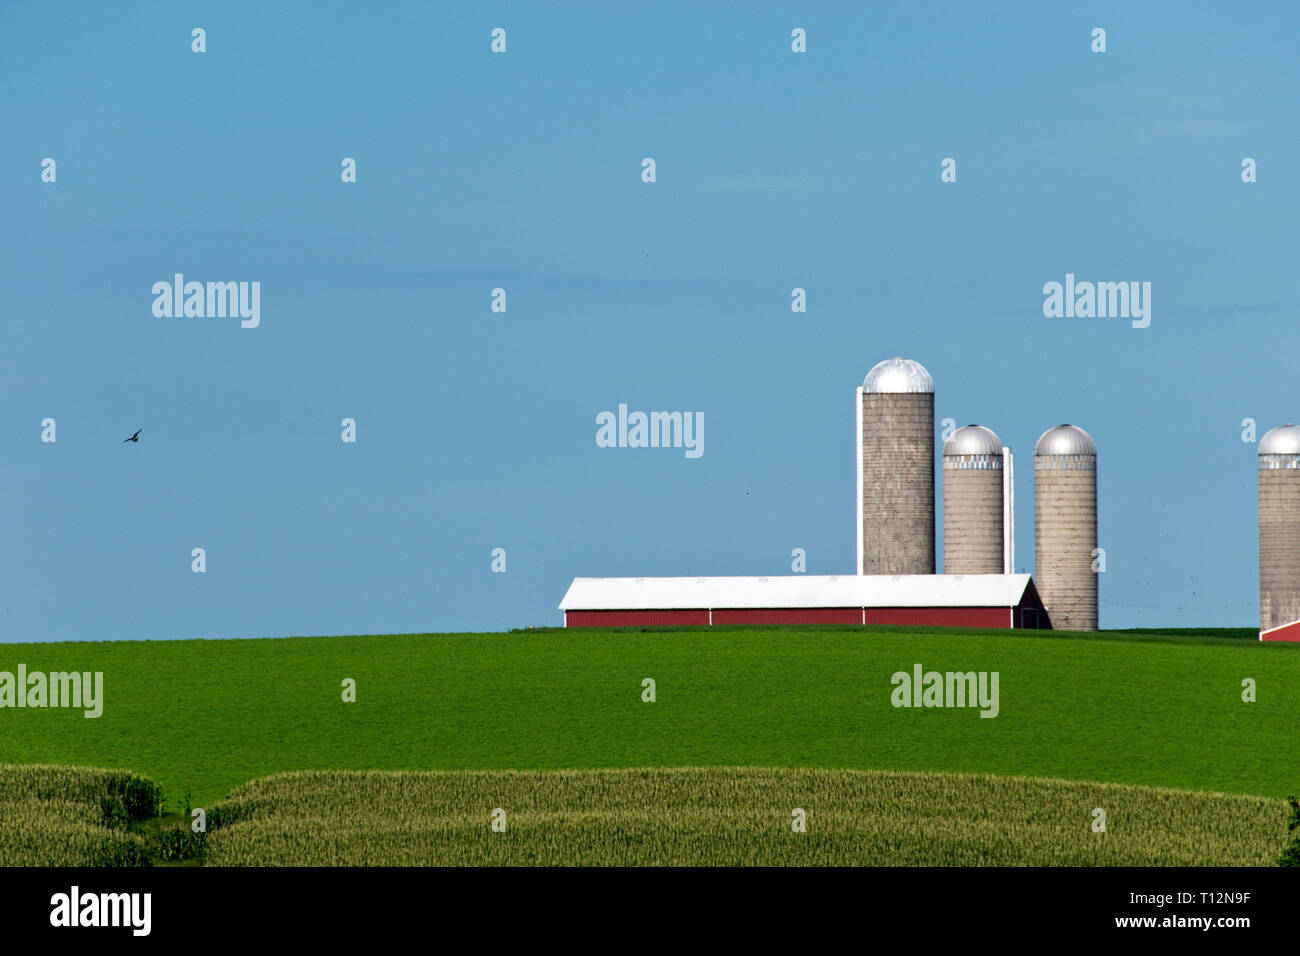 Farm fields with a red barn, grain silos, and a country road in Wisconsin, not far from the city of Oshkosh. Stock Photo